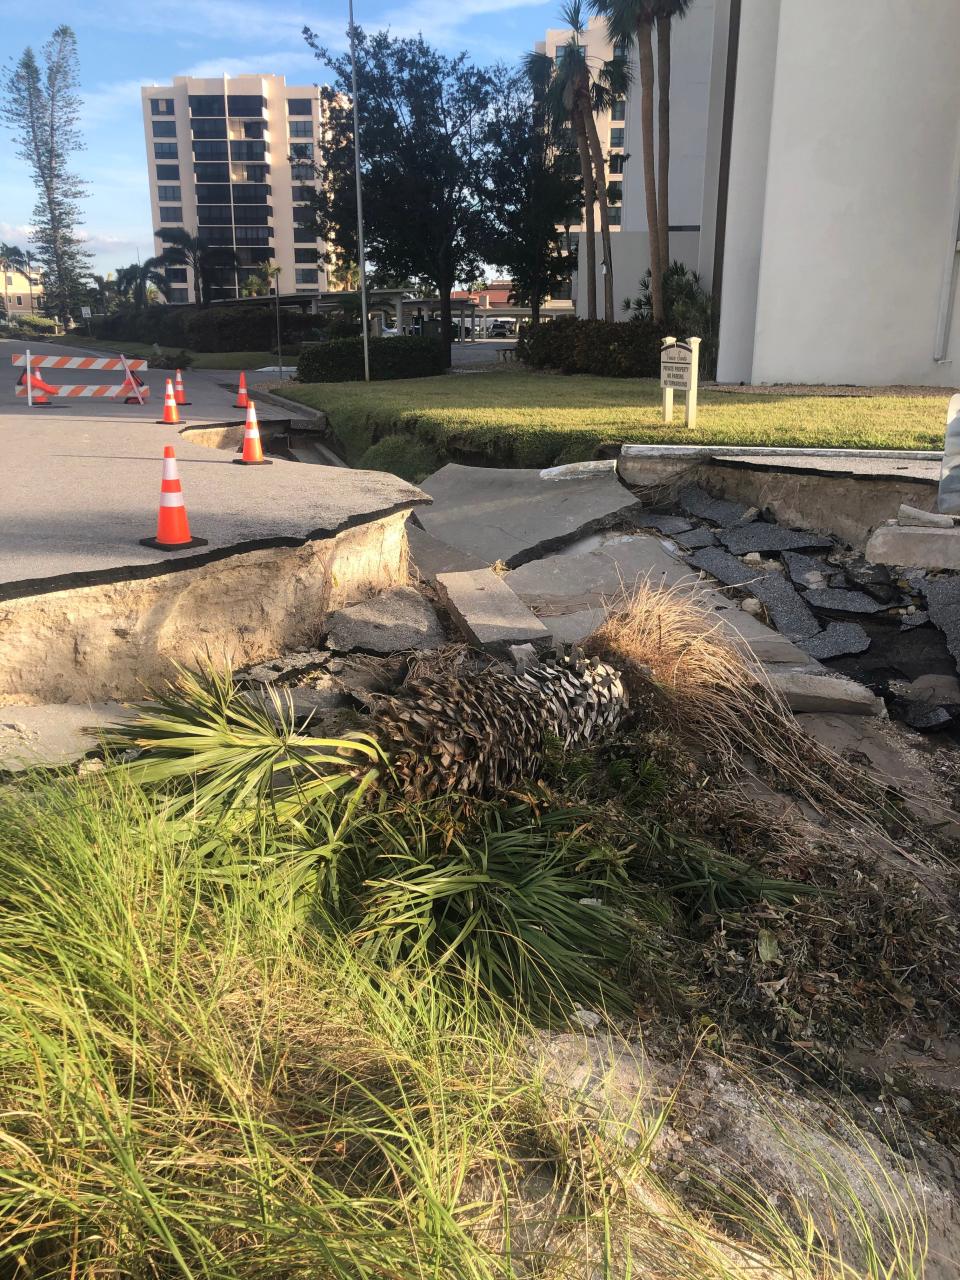 Hurricane Ian caused severe erosion damage to Alhambra Road just north of Venice Sands condominiums on Venice Beach.